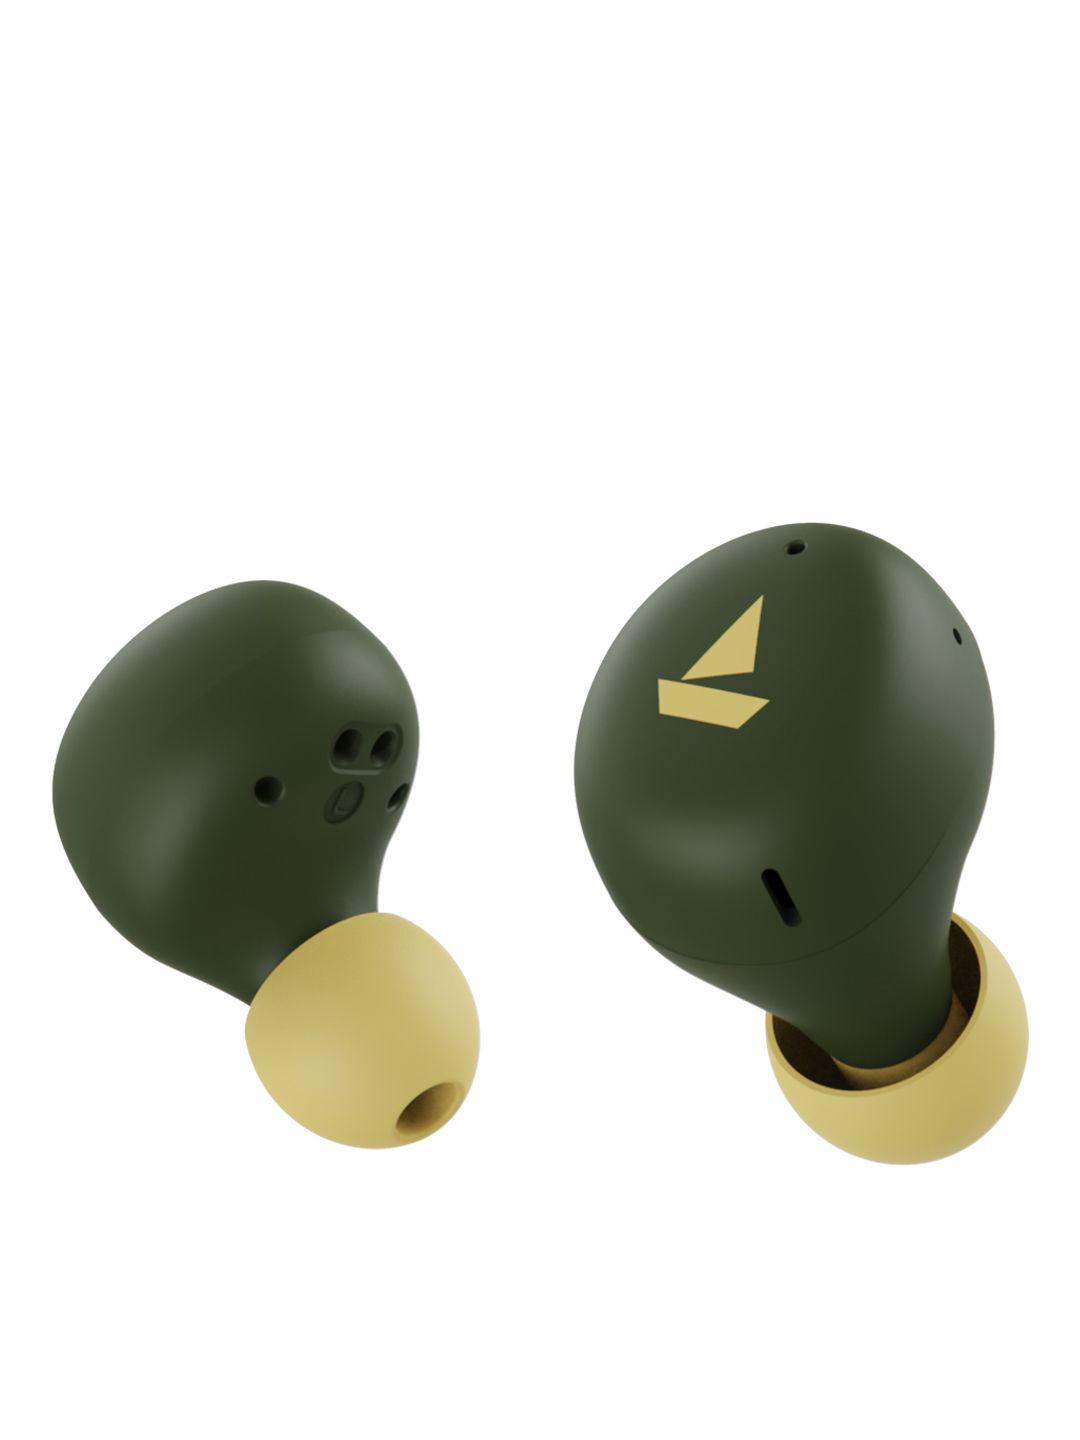 boat airdopes 381 m masaba edition tws earbuds - green chasing star